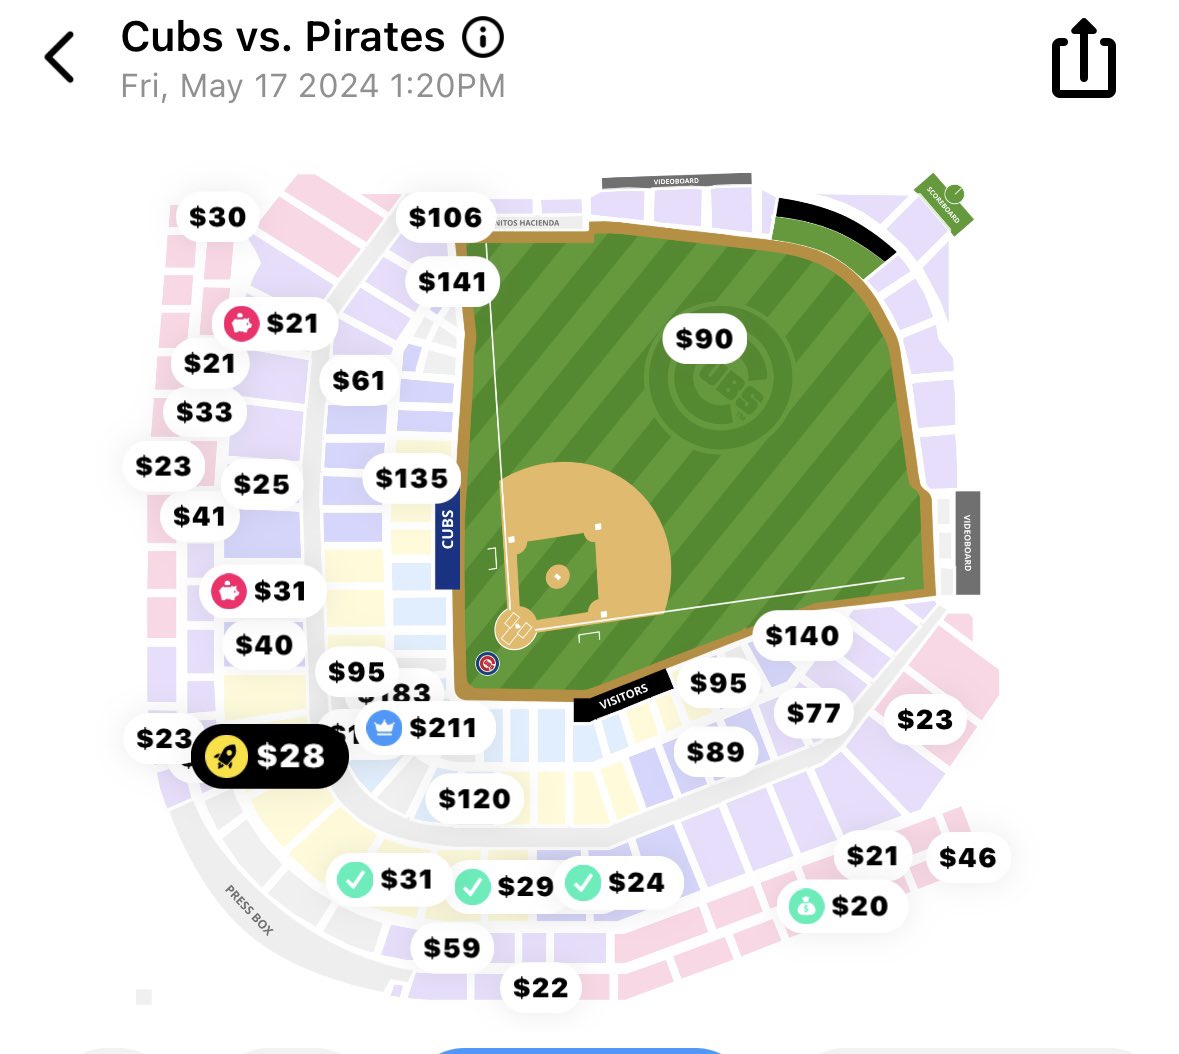 Holy shit at the Cubs Pirates game tomorrow you can play center field for $90